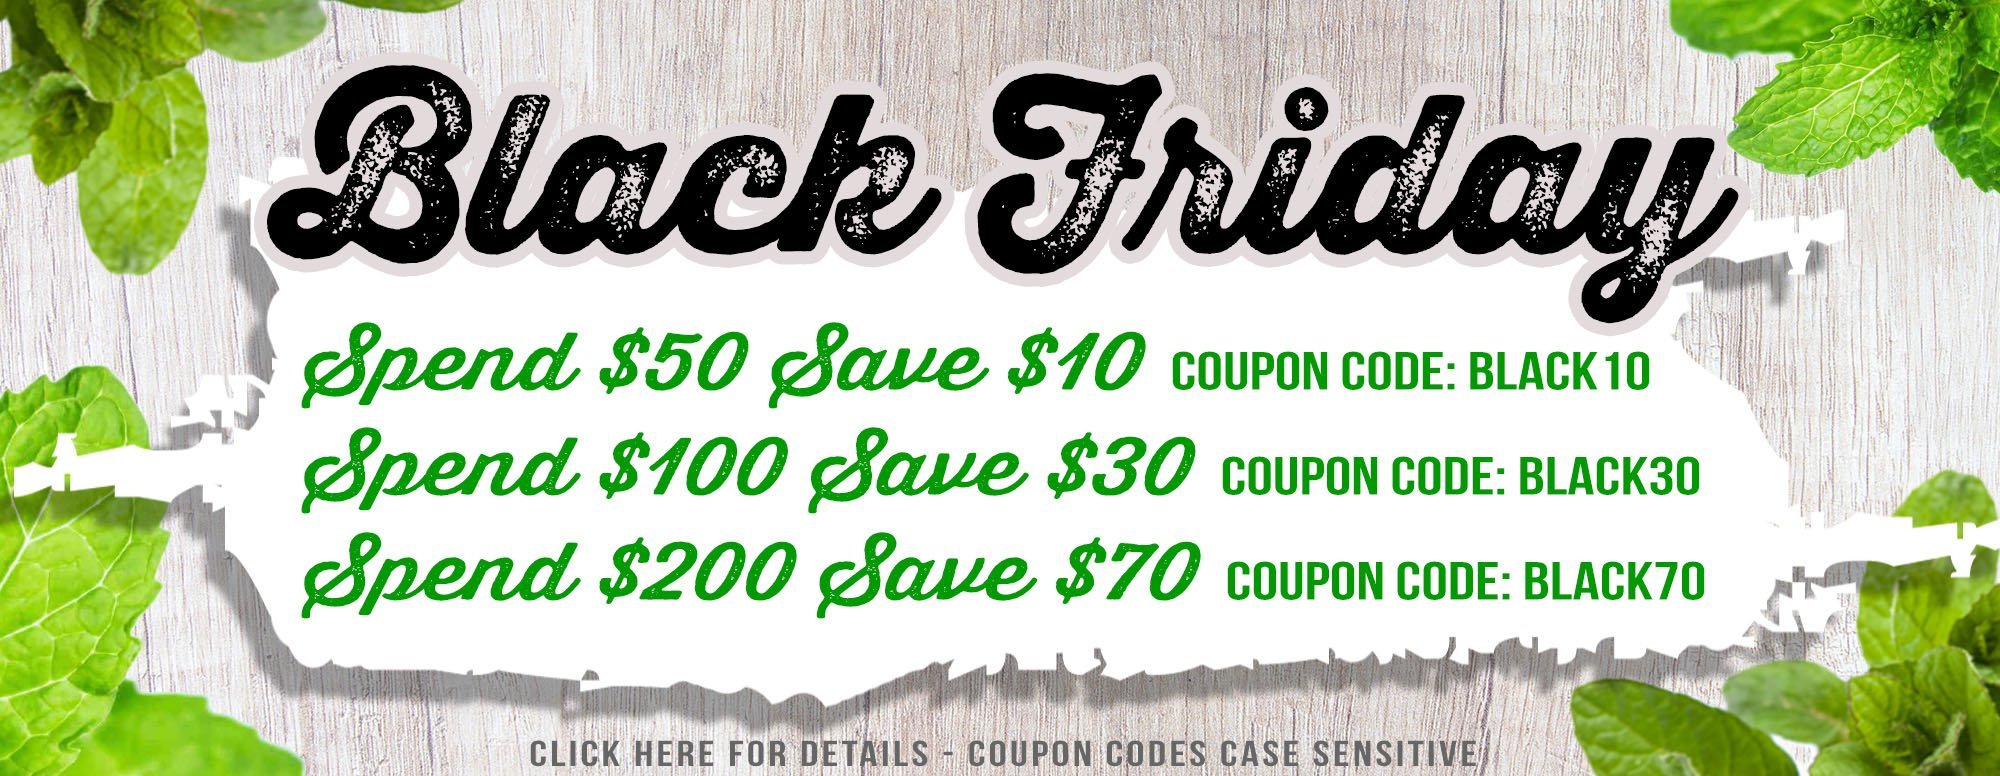 Black Friday Sale! | The Dirt - Super Natural Personal Care